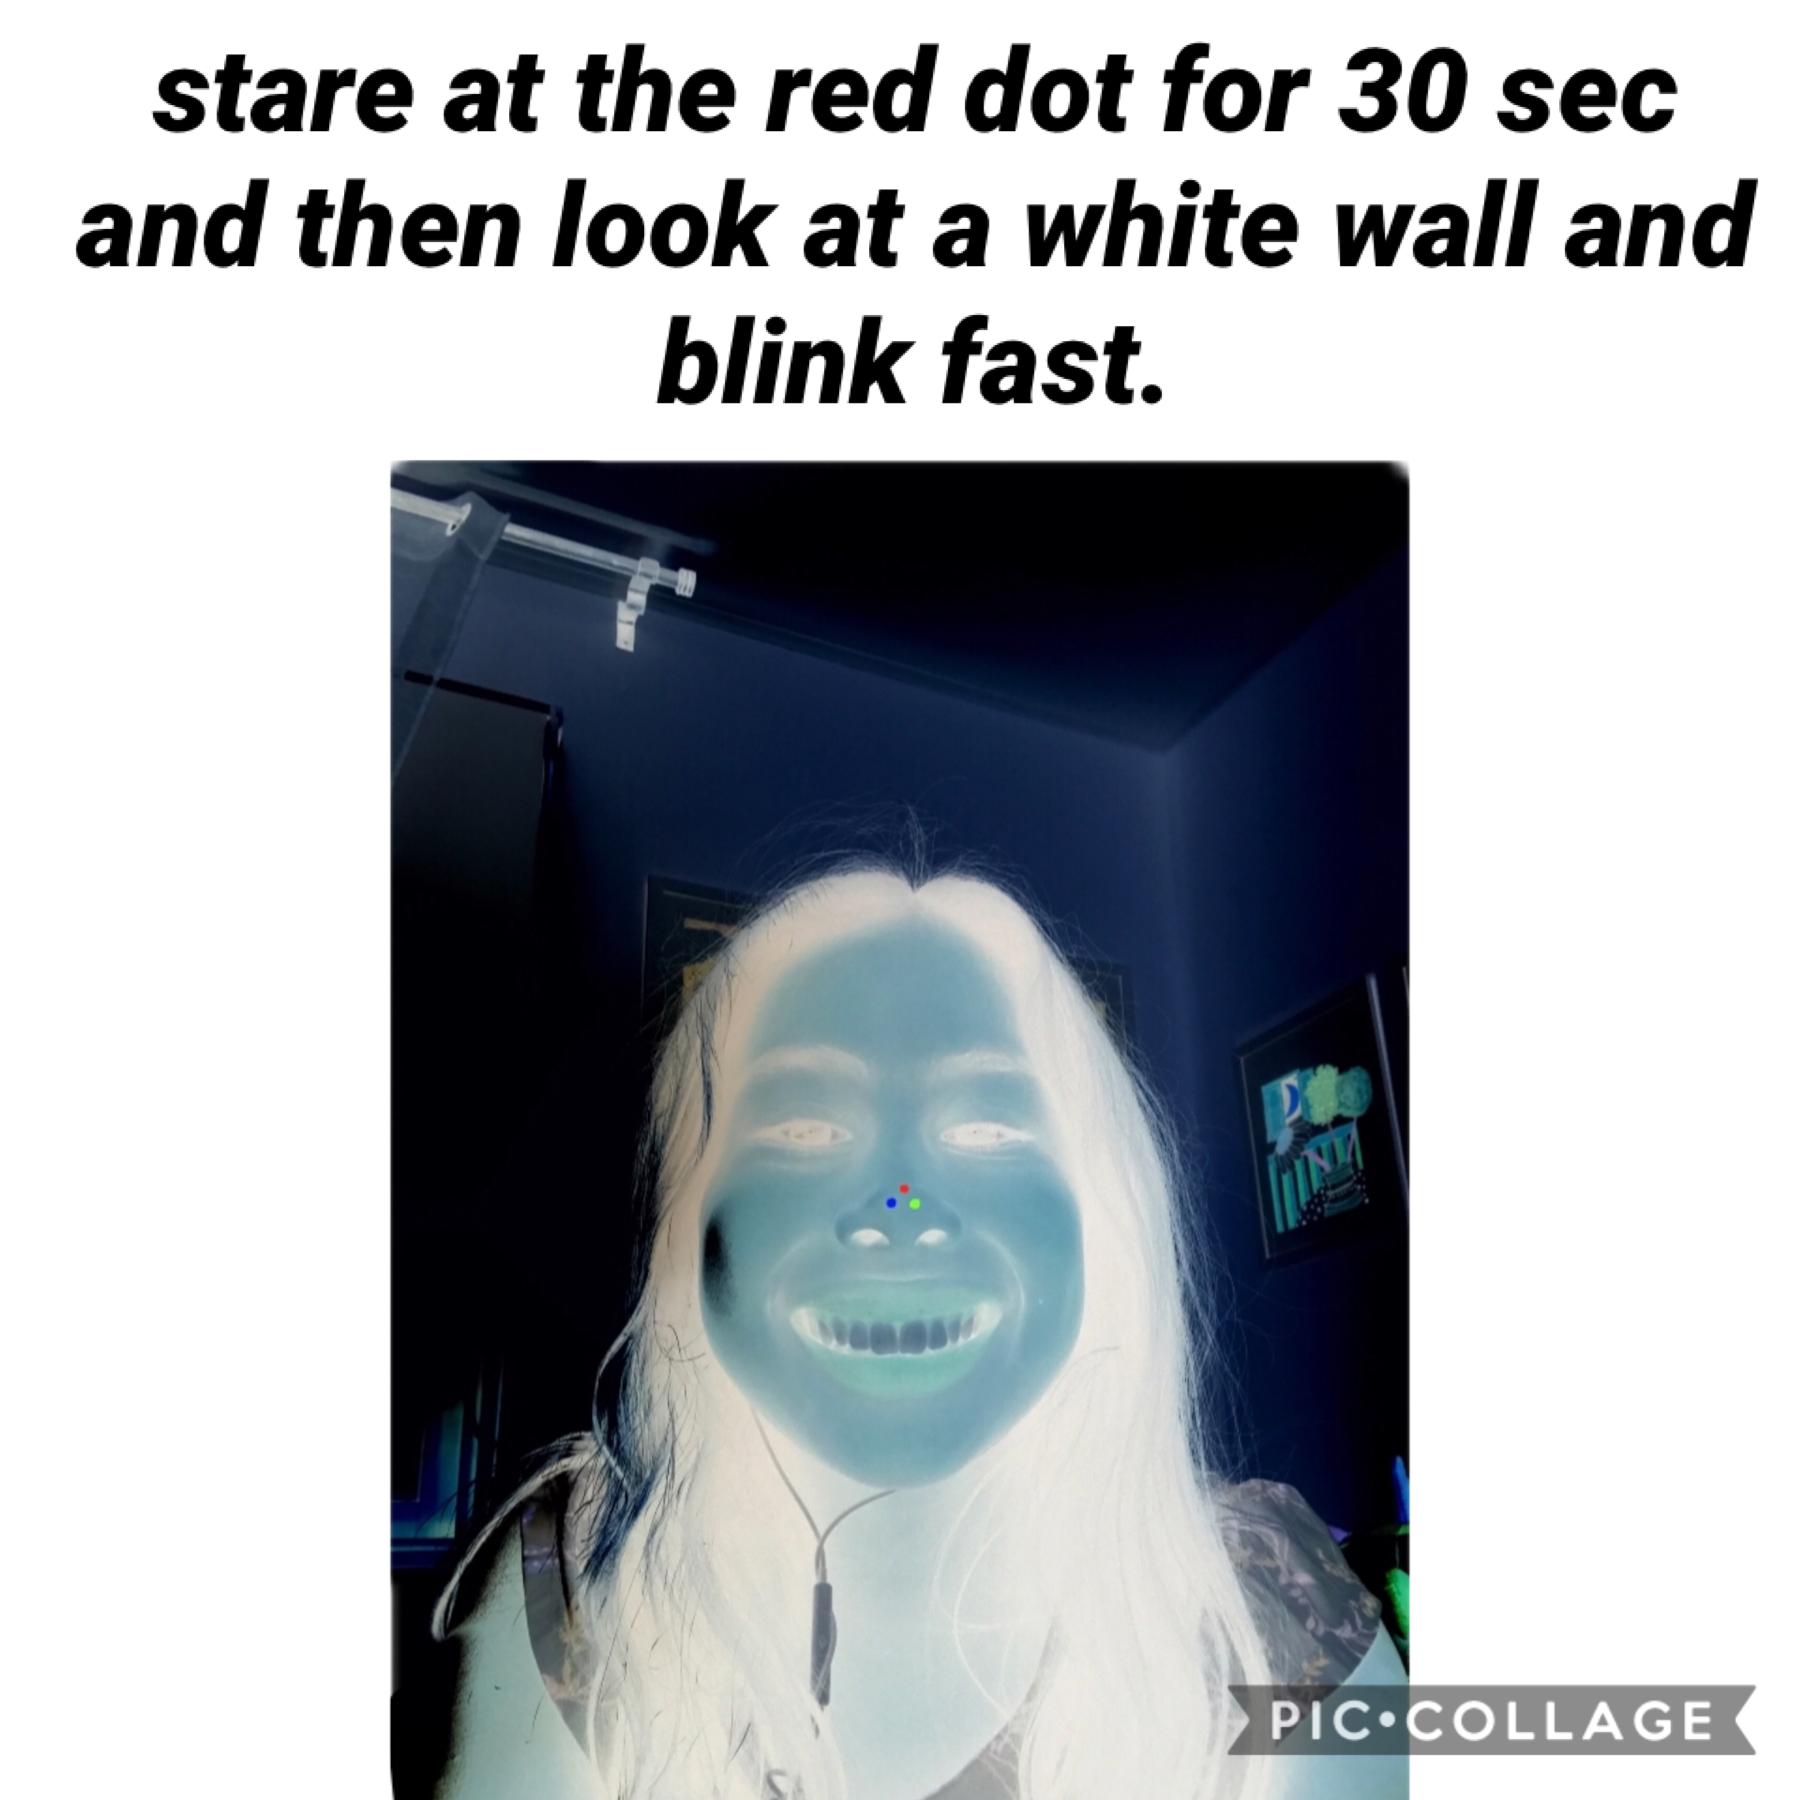 omg this junk really works!! try it! (made it myself lol)